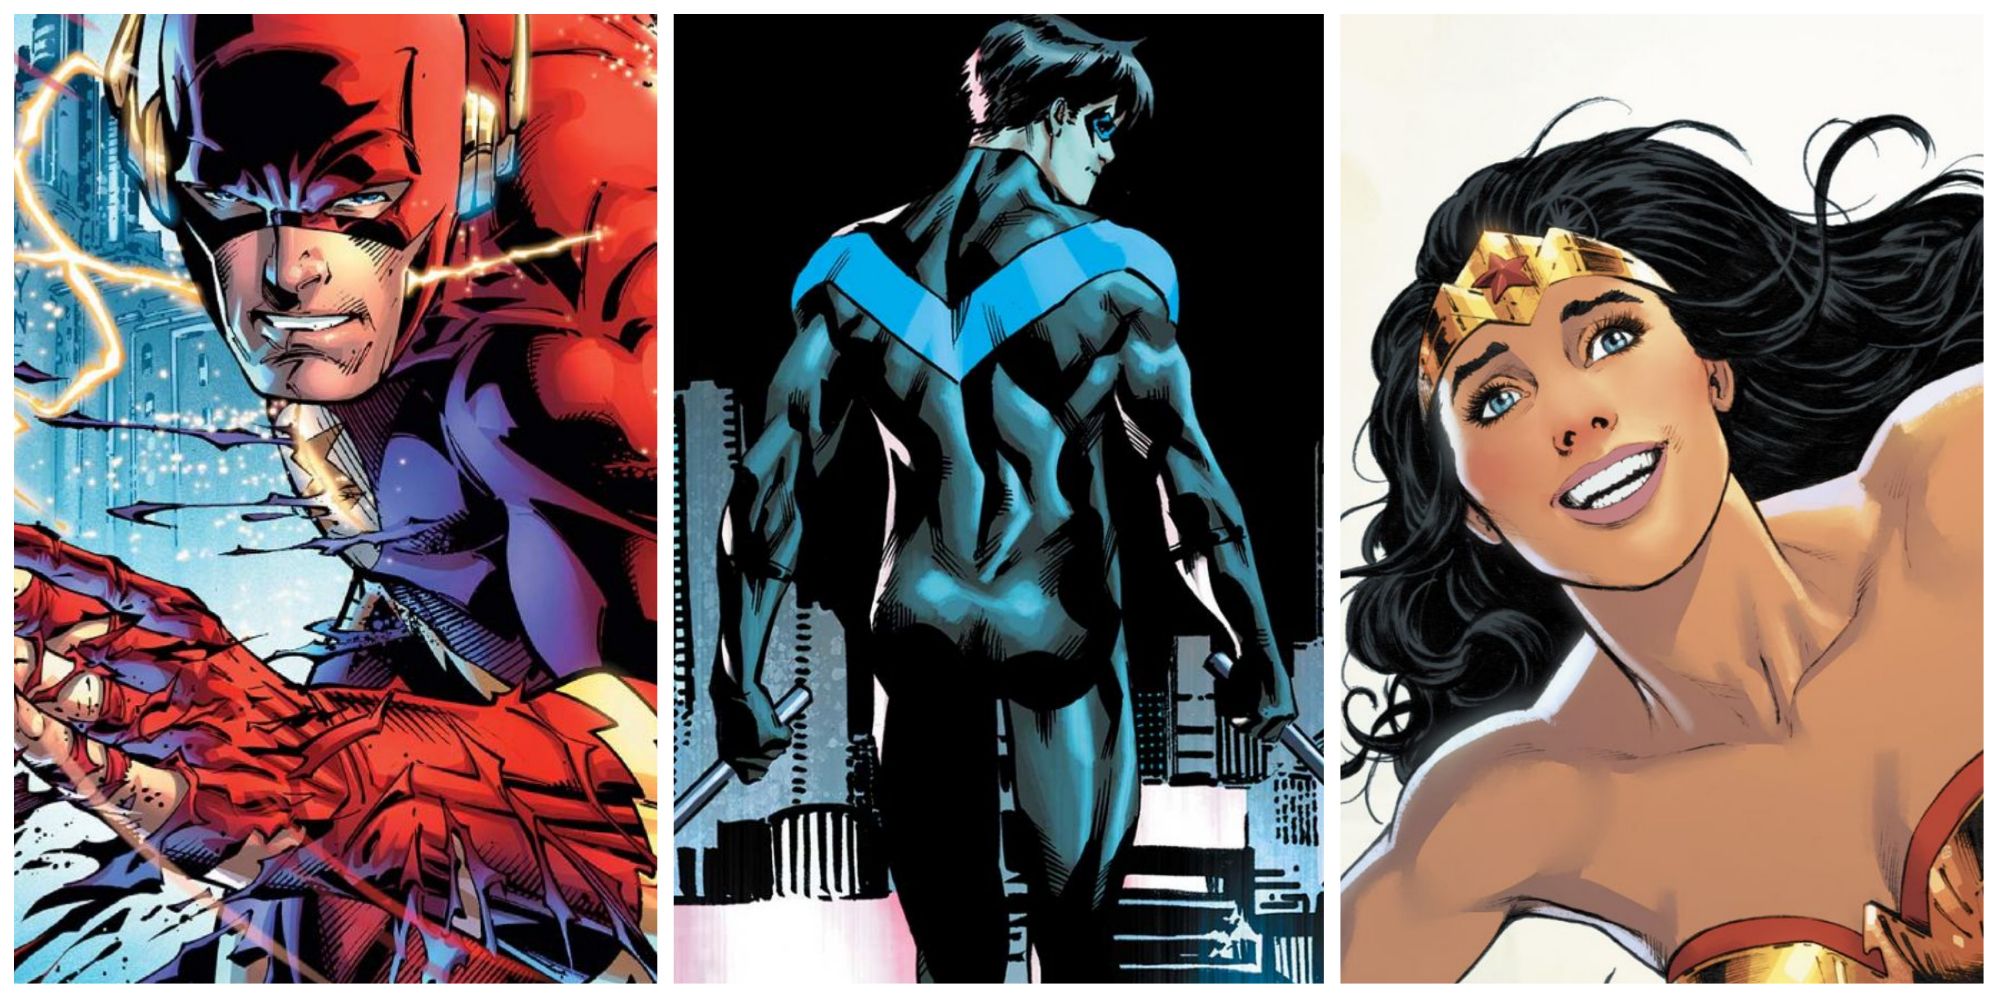 The Flash, Nightwing, and Wonder Woman